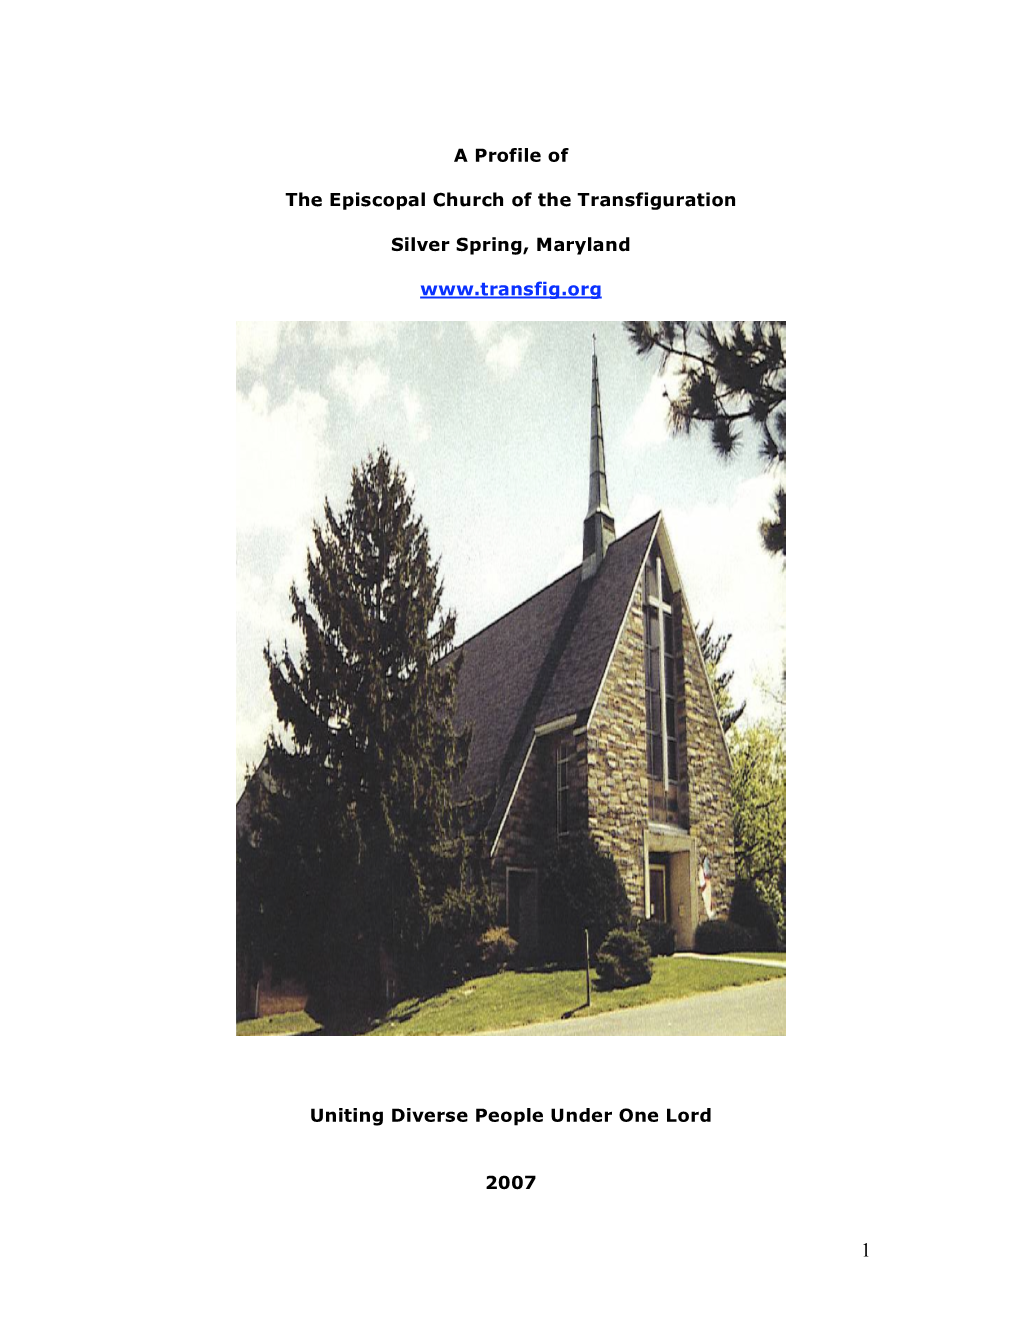 A Profile of the Episcopal Church of the Transfiguration Silver Spring, Maryland Uniting Diverse People Under O